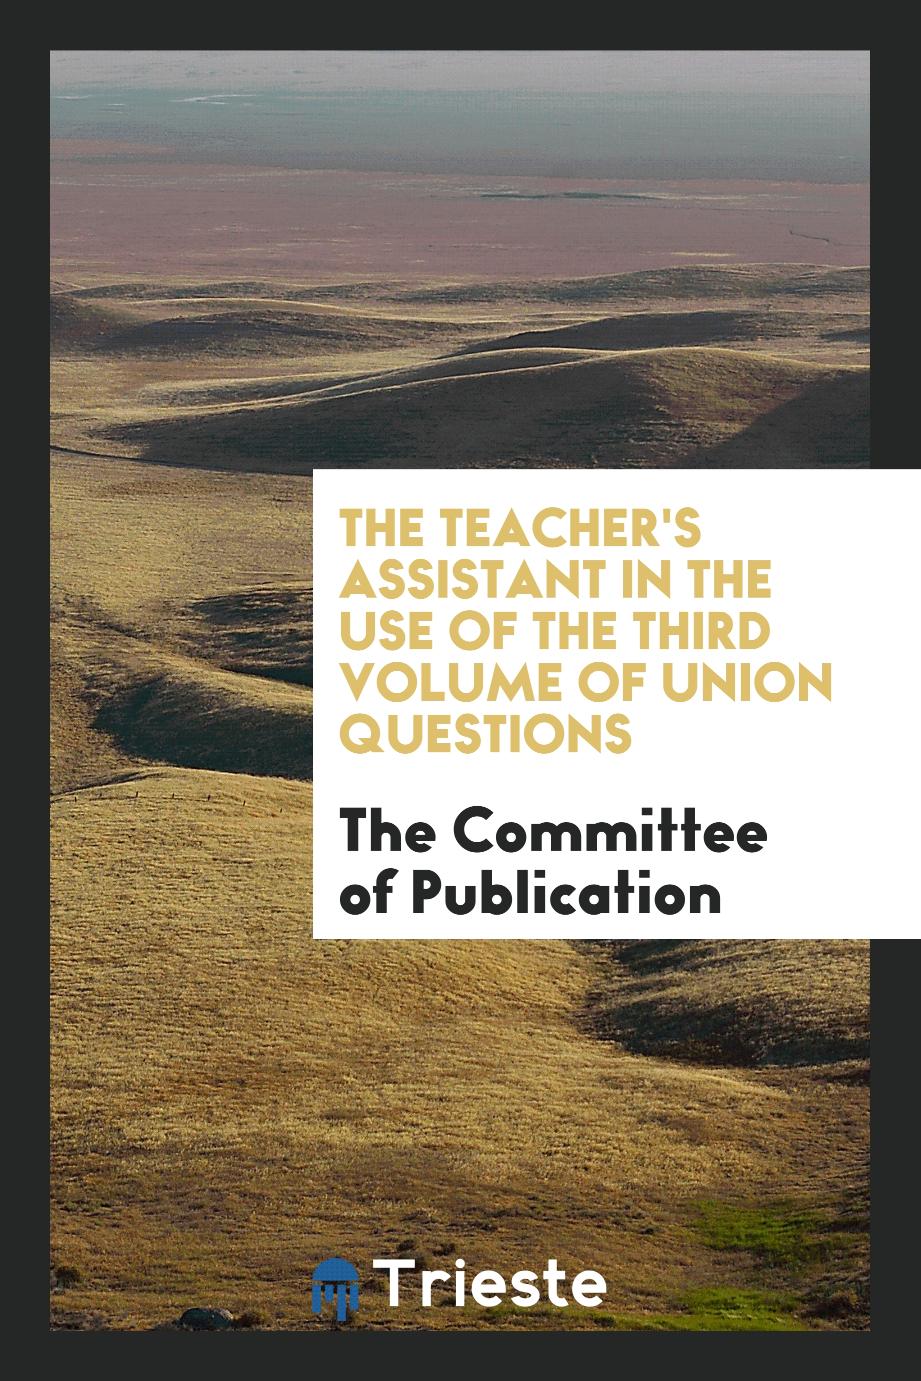 The Committee of Publication - The Teacher's assistant in the use of the third volume of Union questions